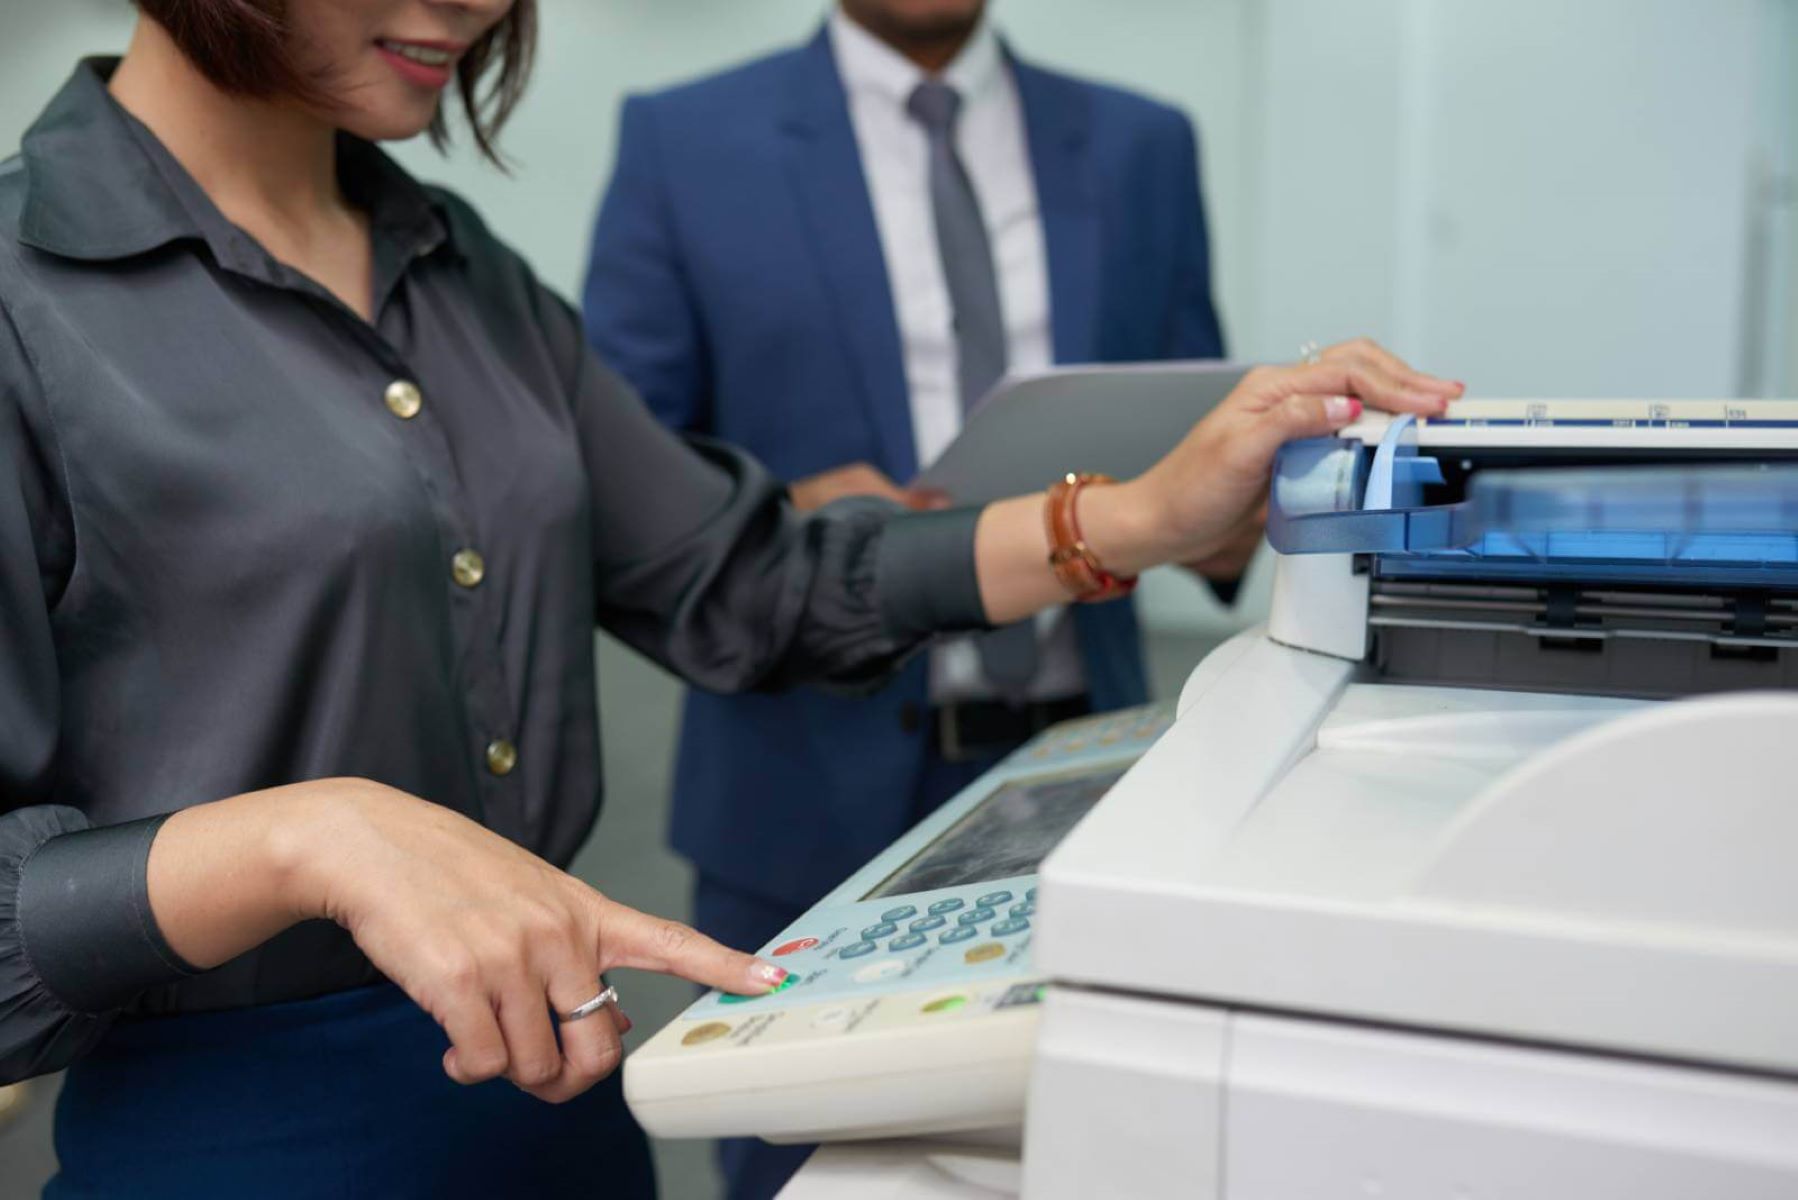 How To Scan Documents On A Printer